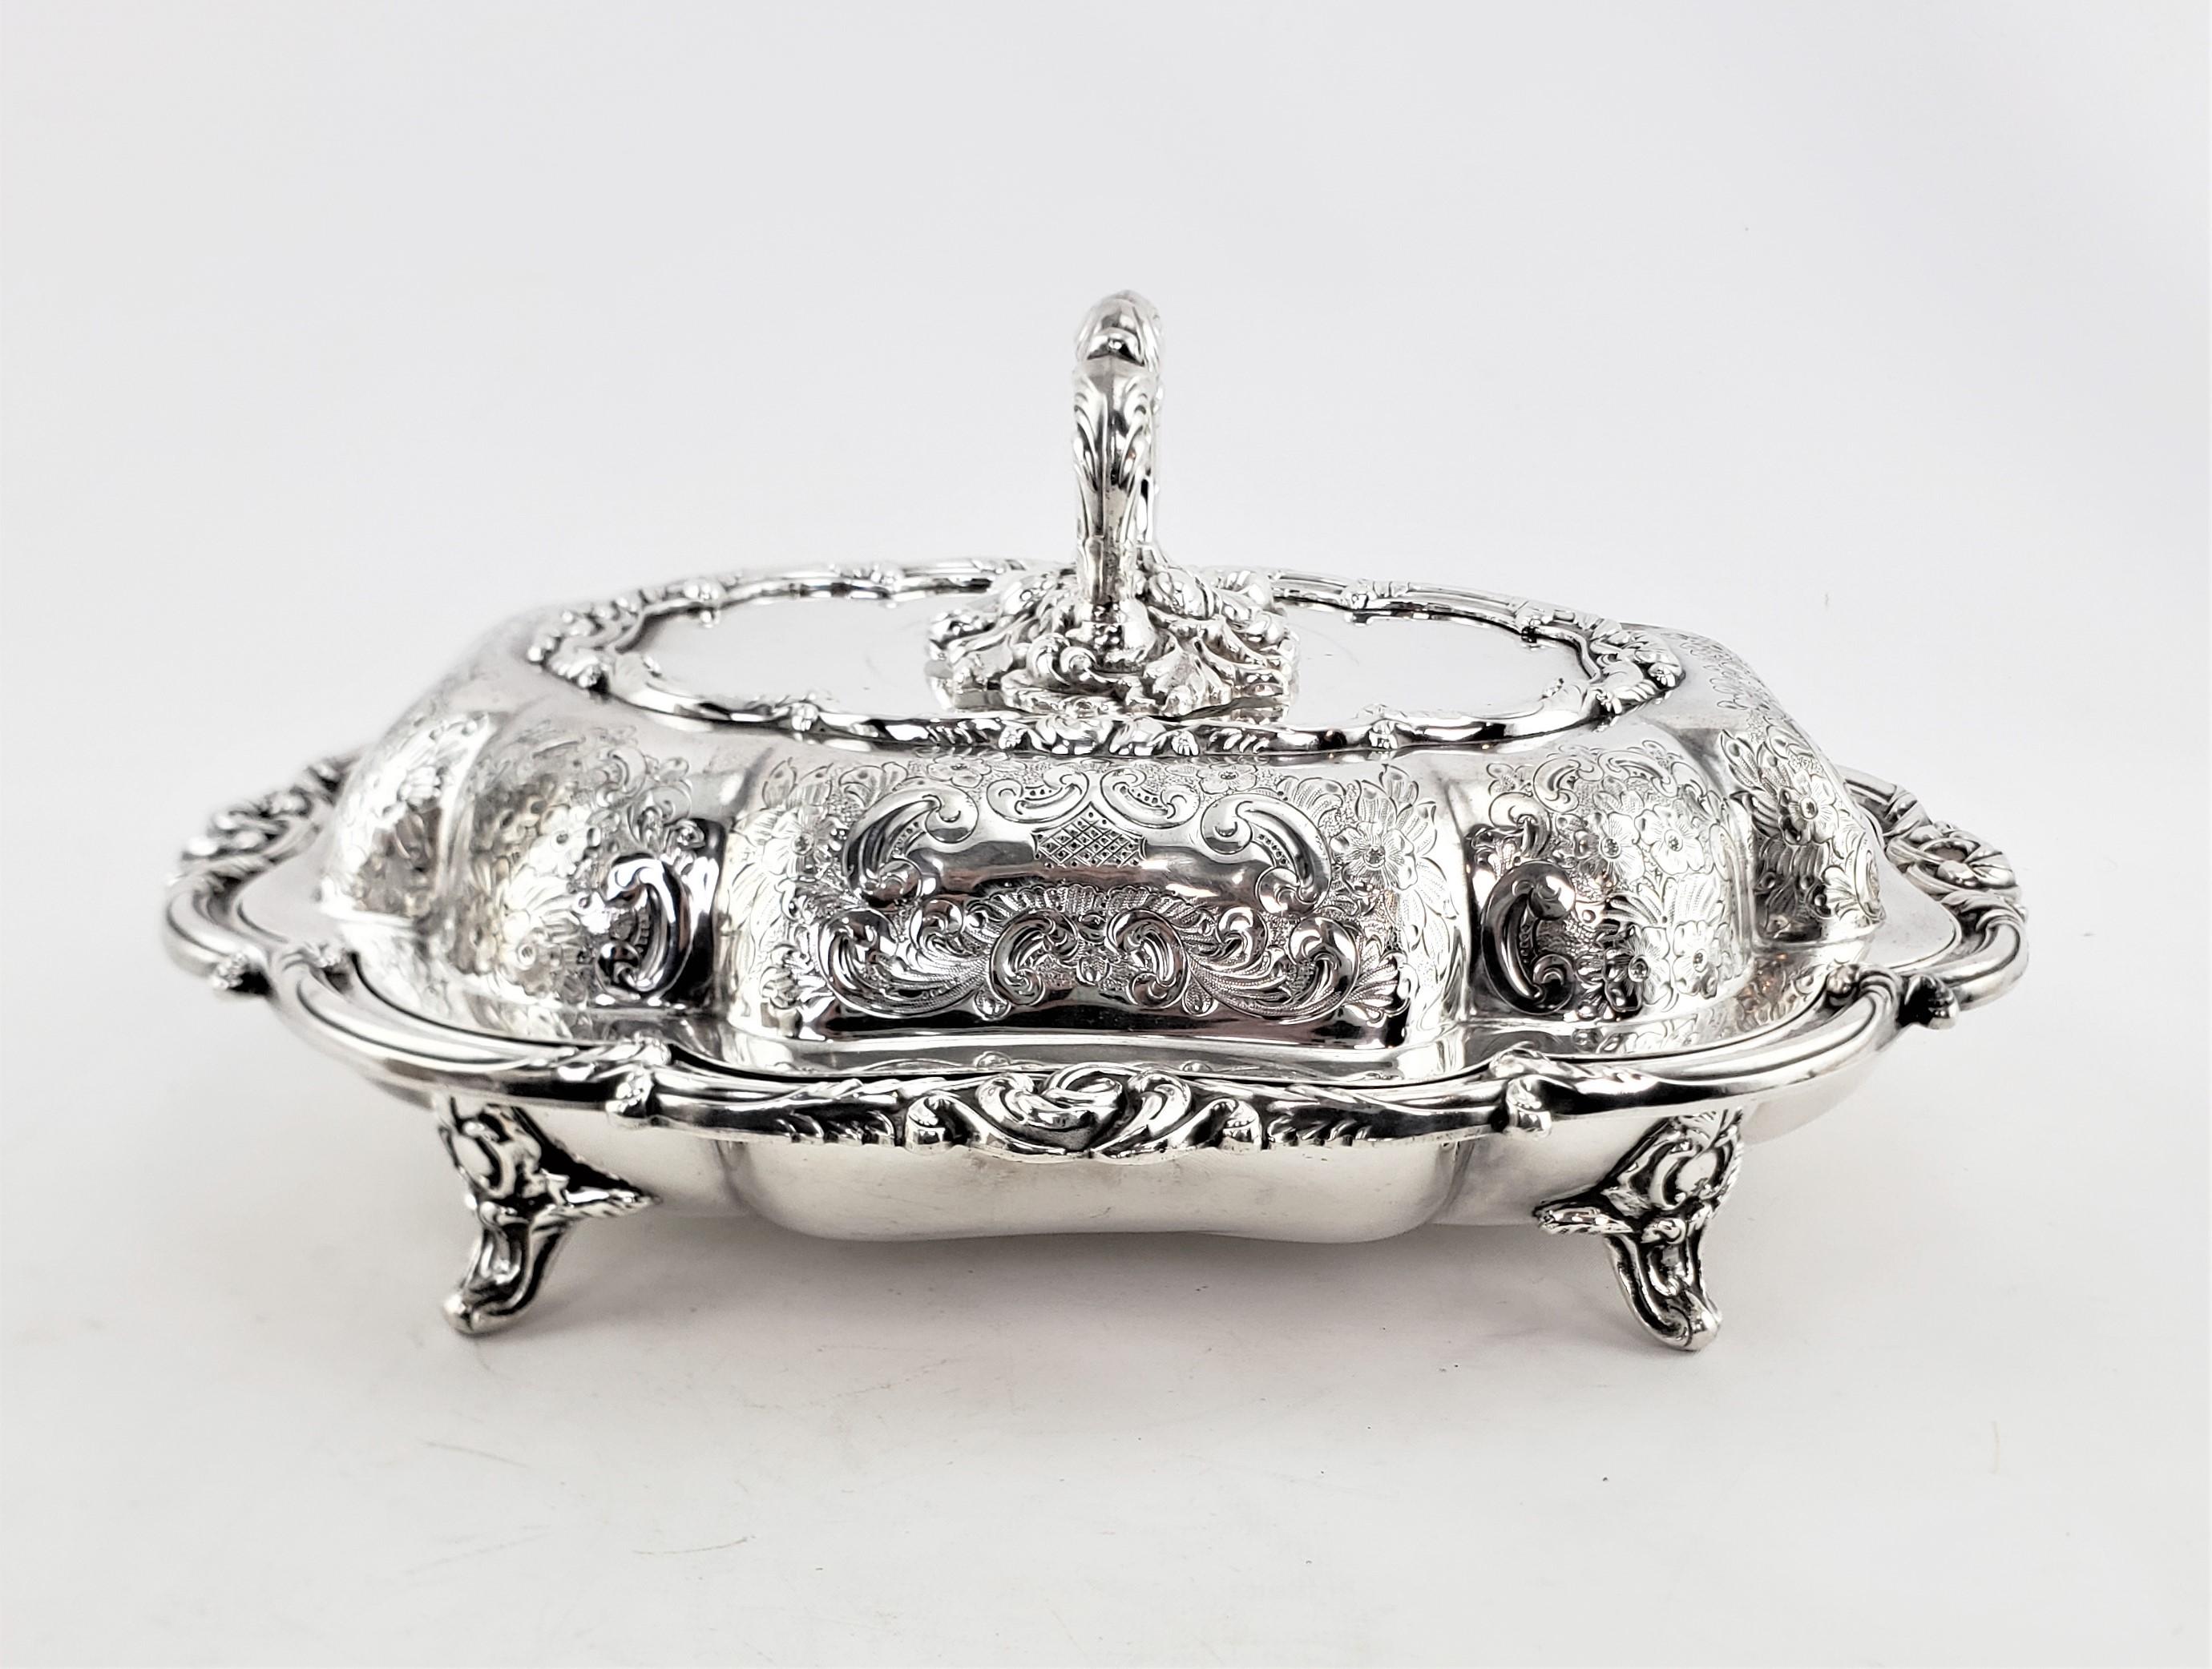 This antique silver plated covered server was made by the well known Barker Brothers of England in approximately 1880 and done in a period Victorian style. This entree server has a raised scalloped shaped top with a removable cast and plated handle